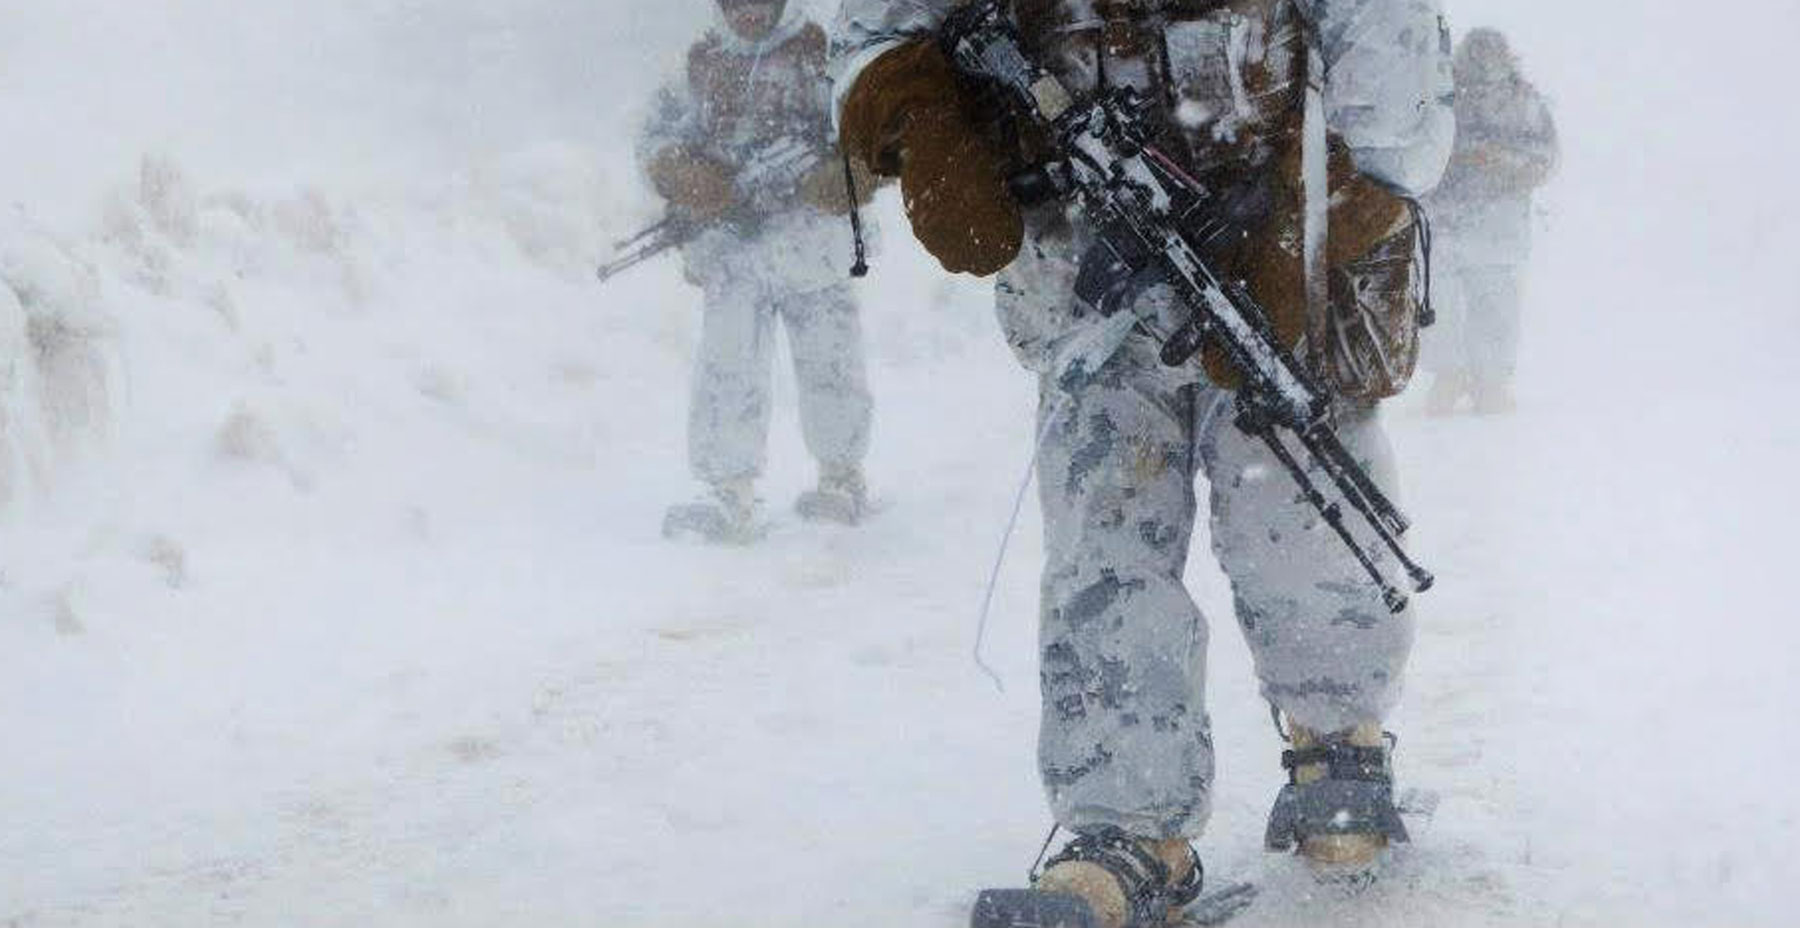 Soldiers in snow